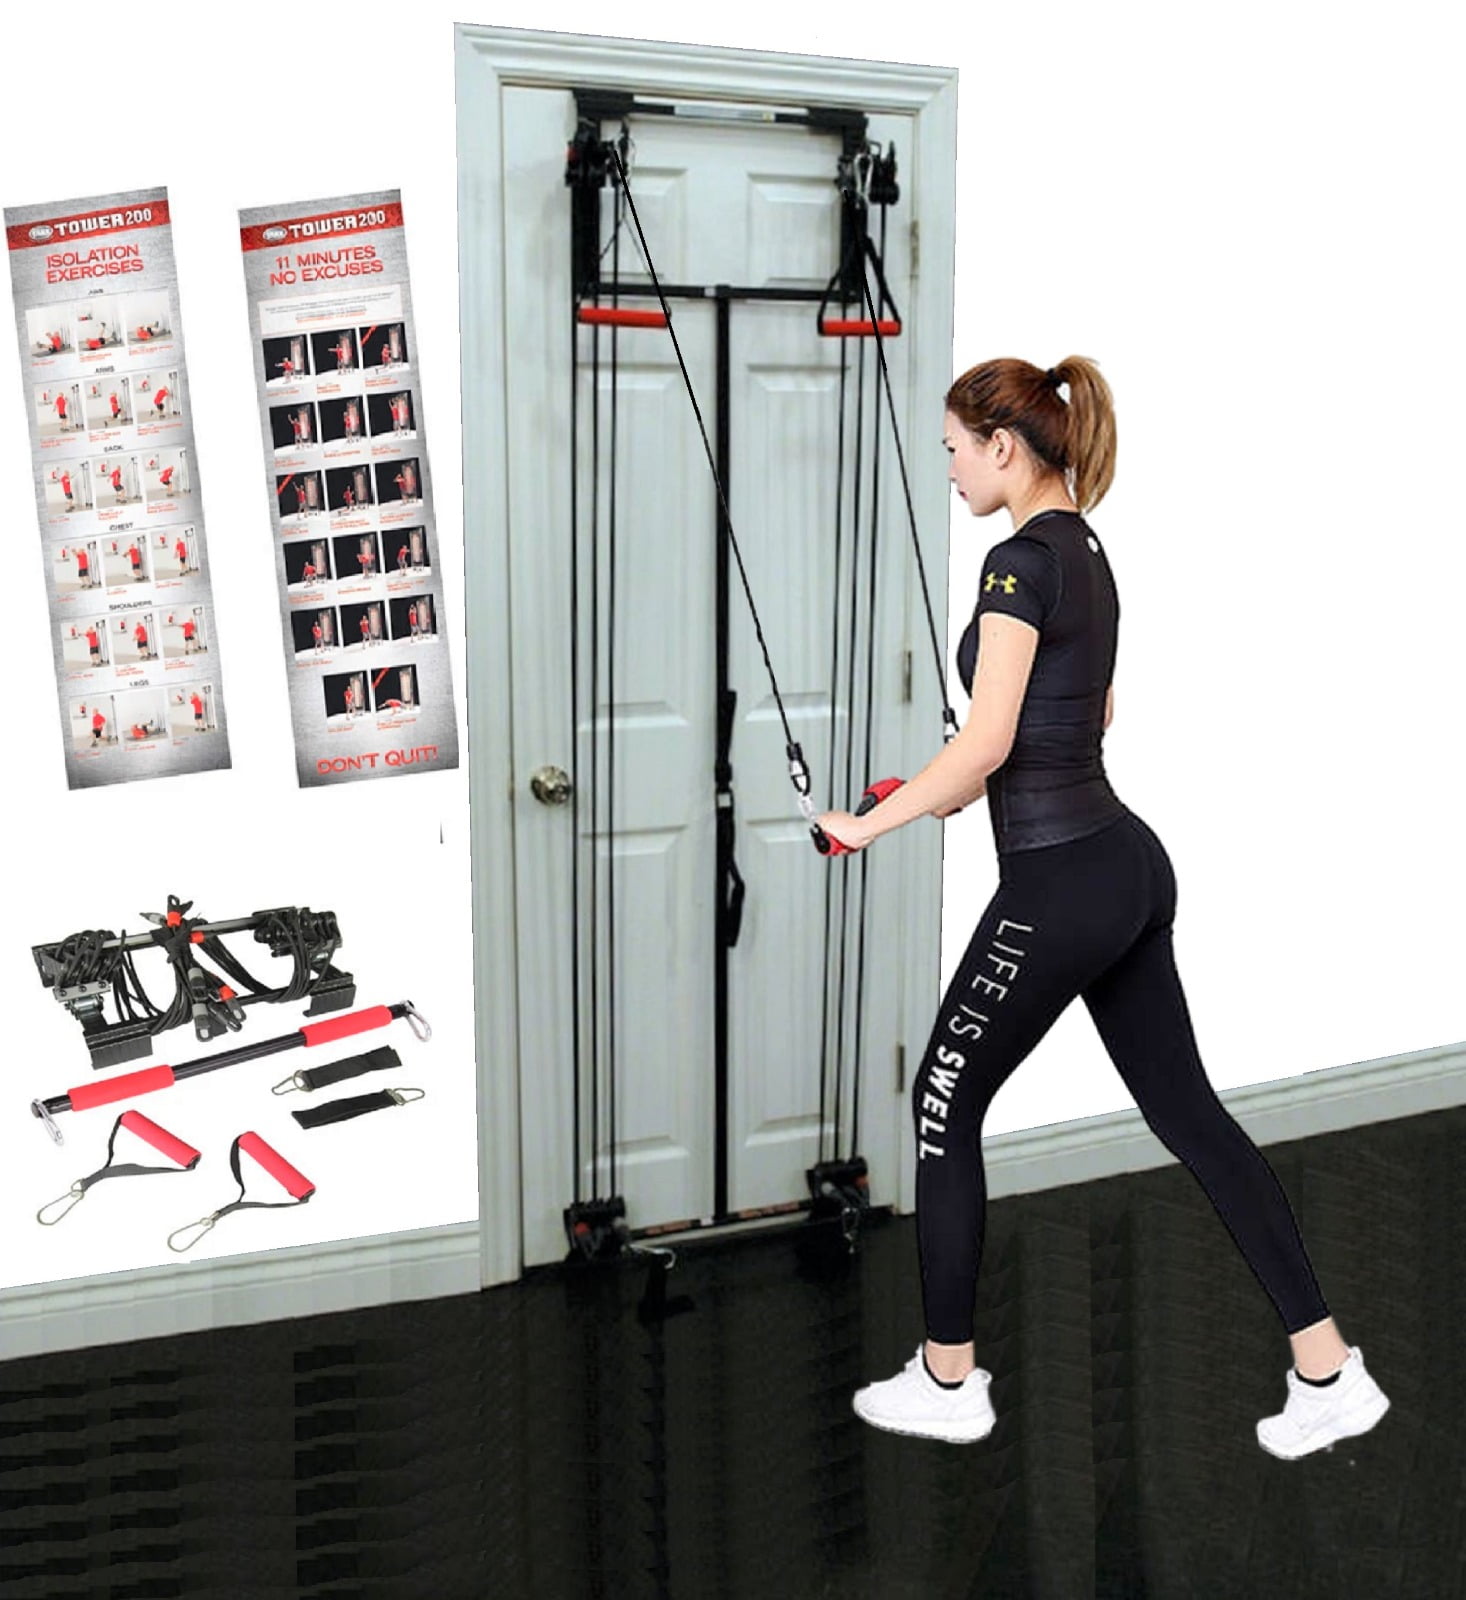 Tower 200 Door Gym Complete Full Body Workout Training System - Includes  Handles, Ankle Straps, Straight Bar, DVD + Workout Chart Home Gym Equipment